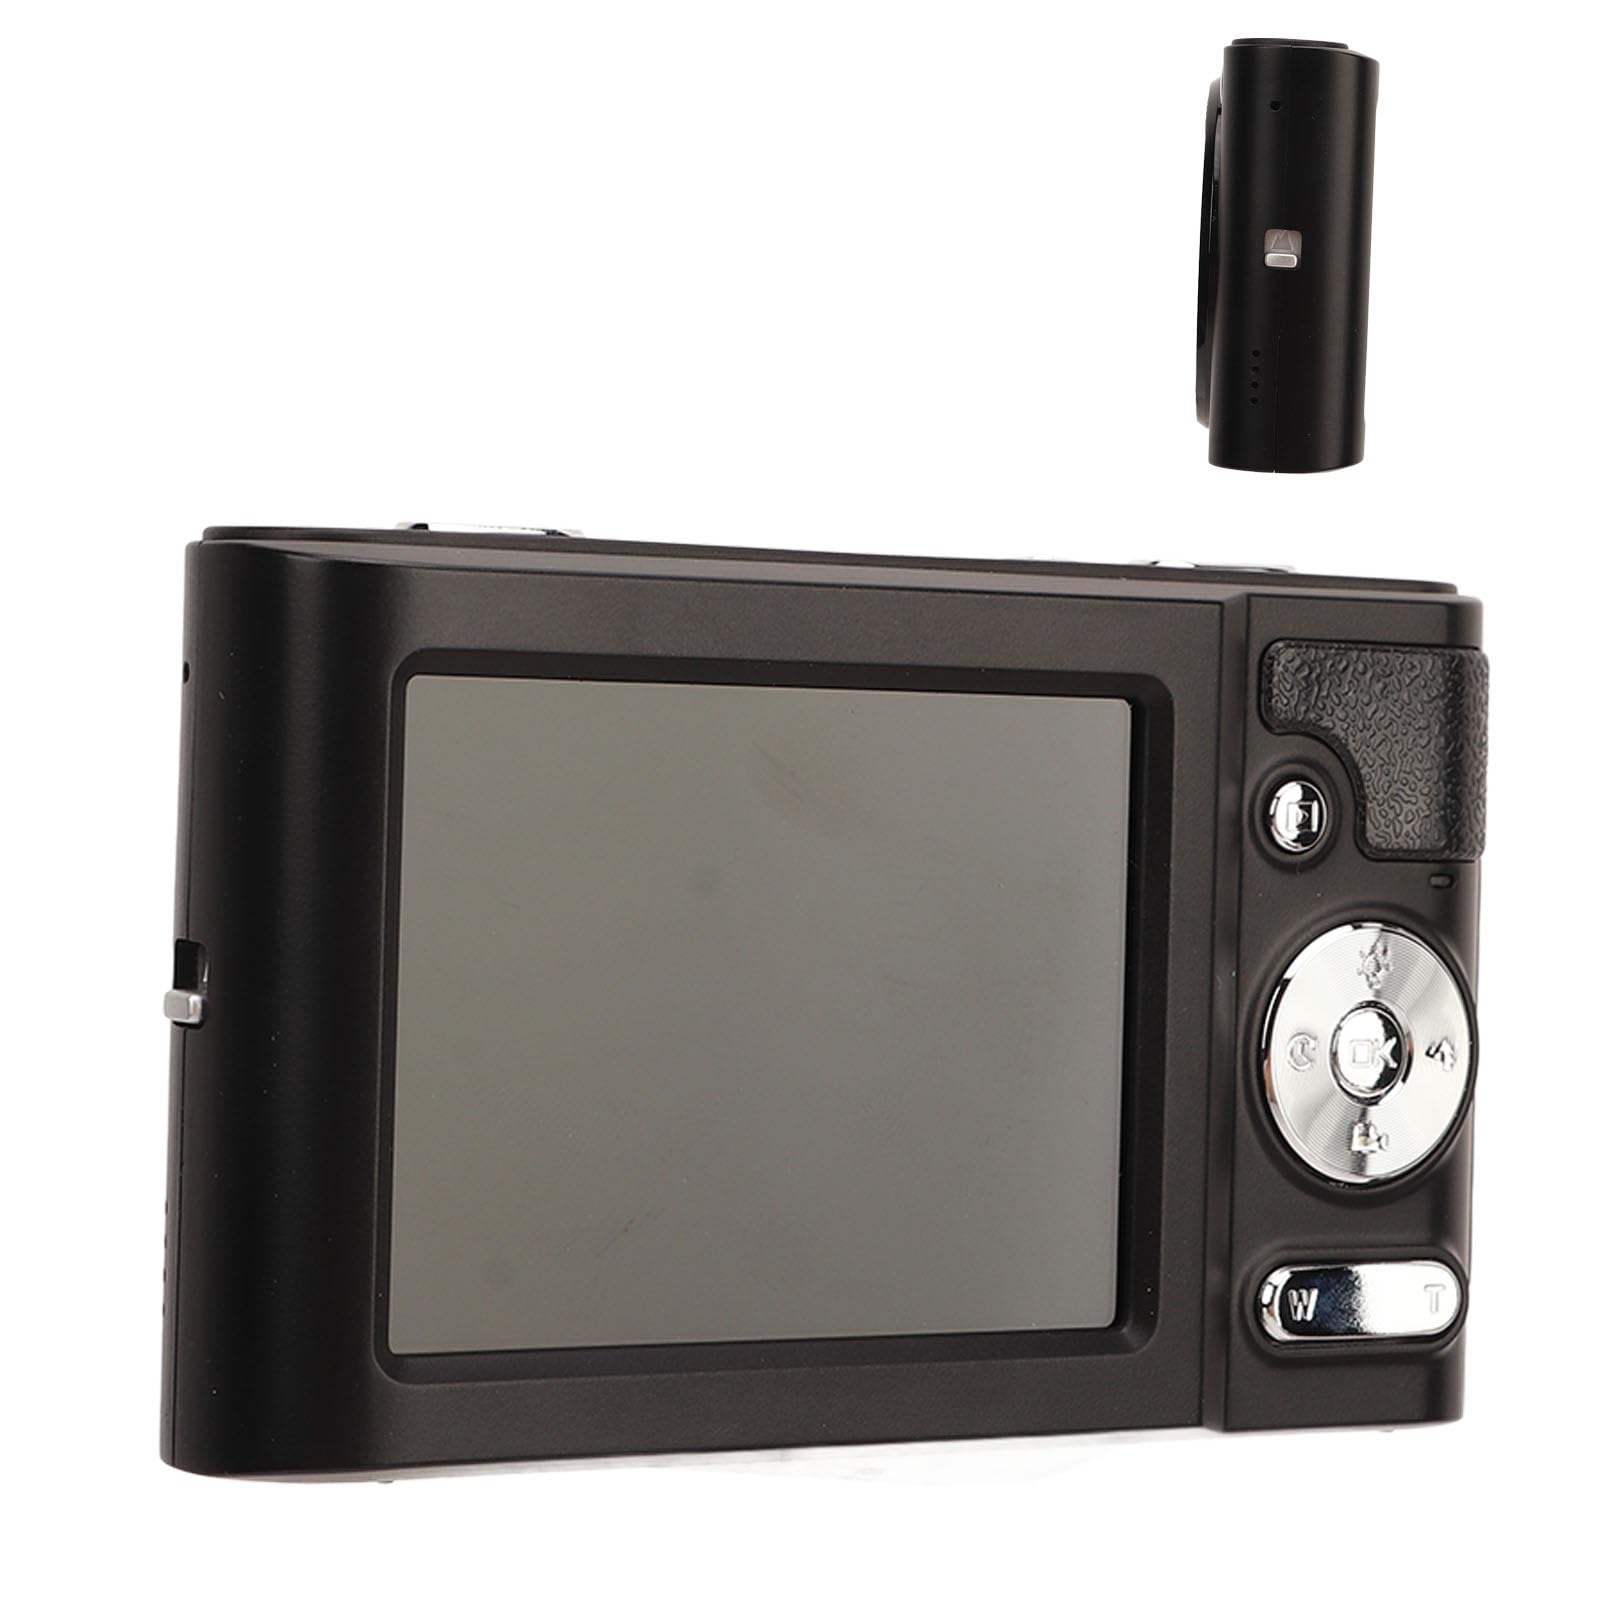 HD Digital Camera, Auto Focus Portable Small Camera 1080P Video Resolution Plastic and Metal 8X Zoom 2.7 in for Gift